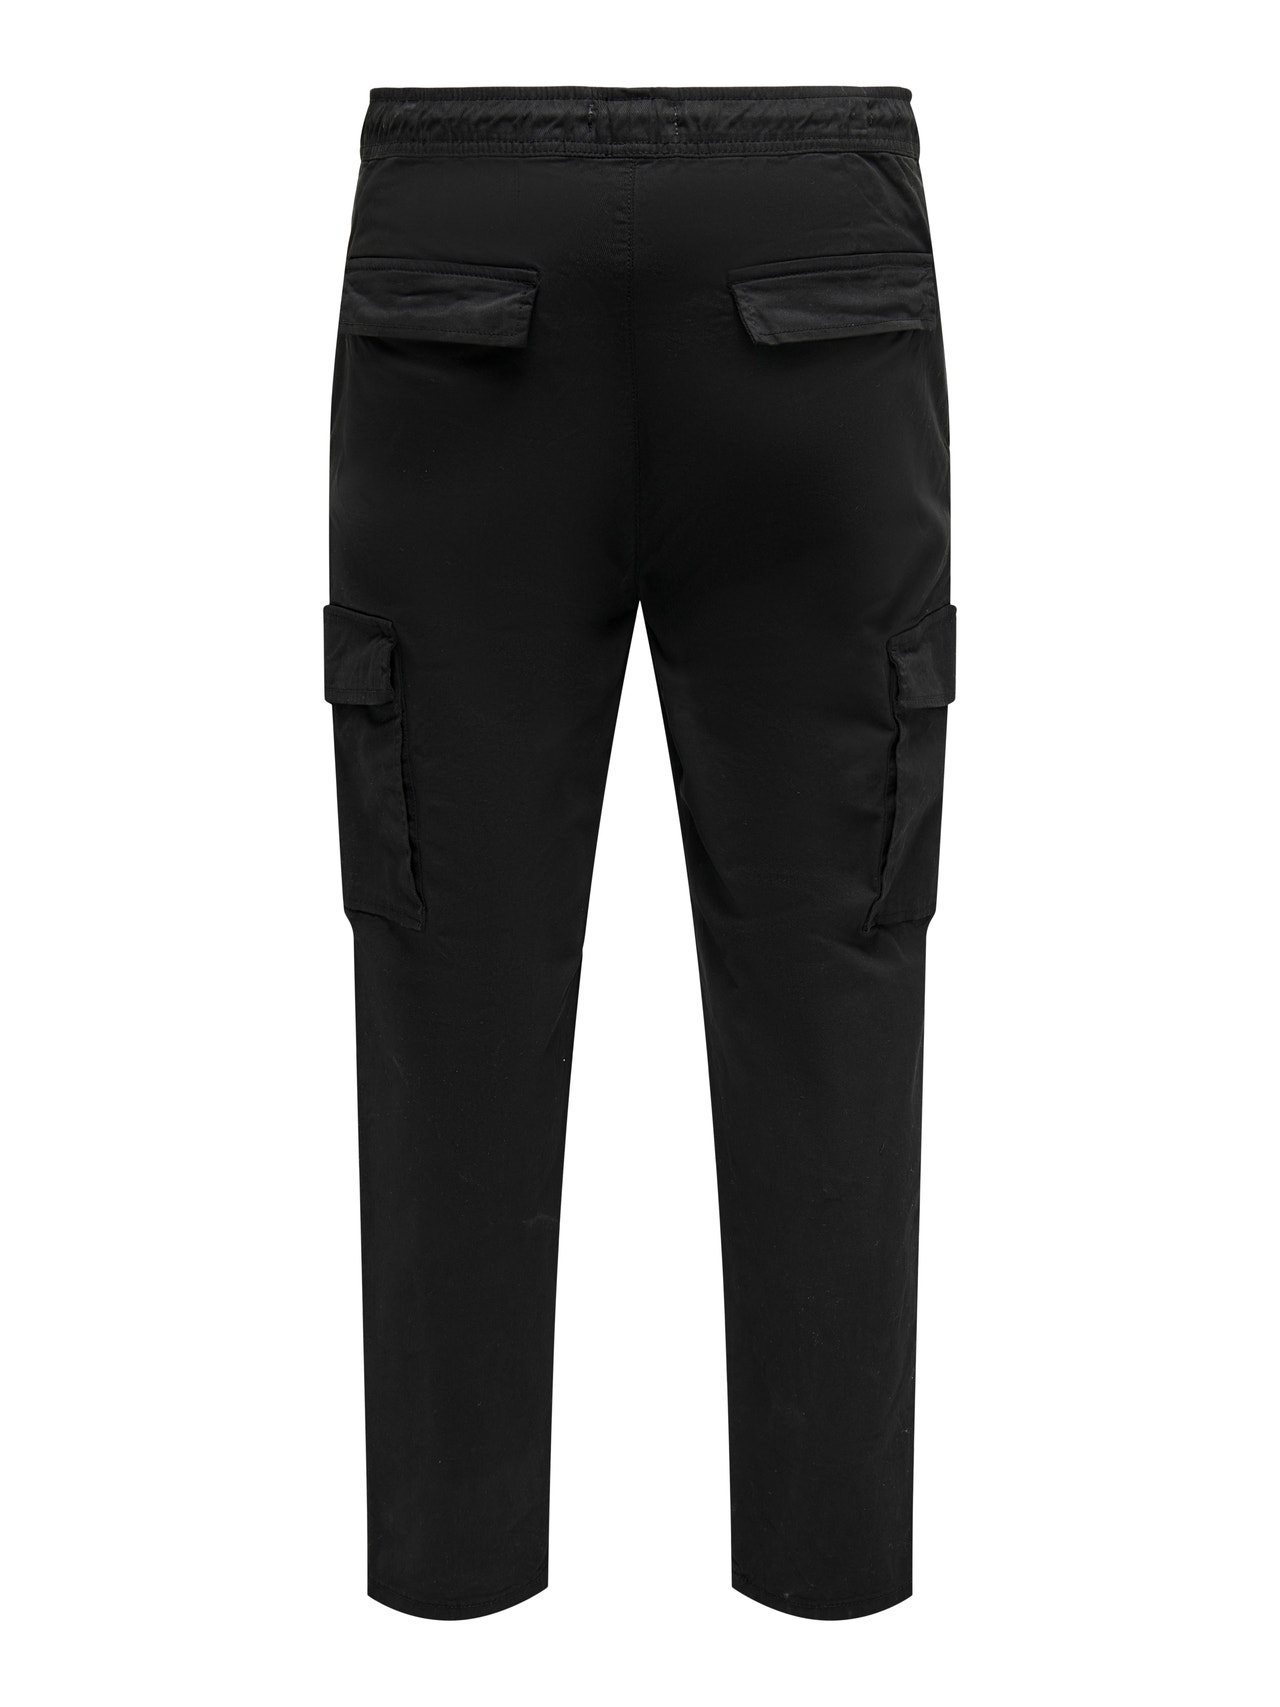 ONLY & SONS ONSELL TAPERED CARGO 4485 PANT -Black - 22024485